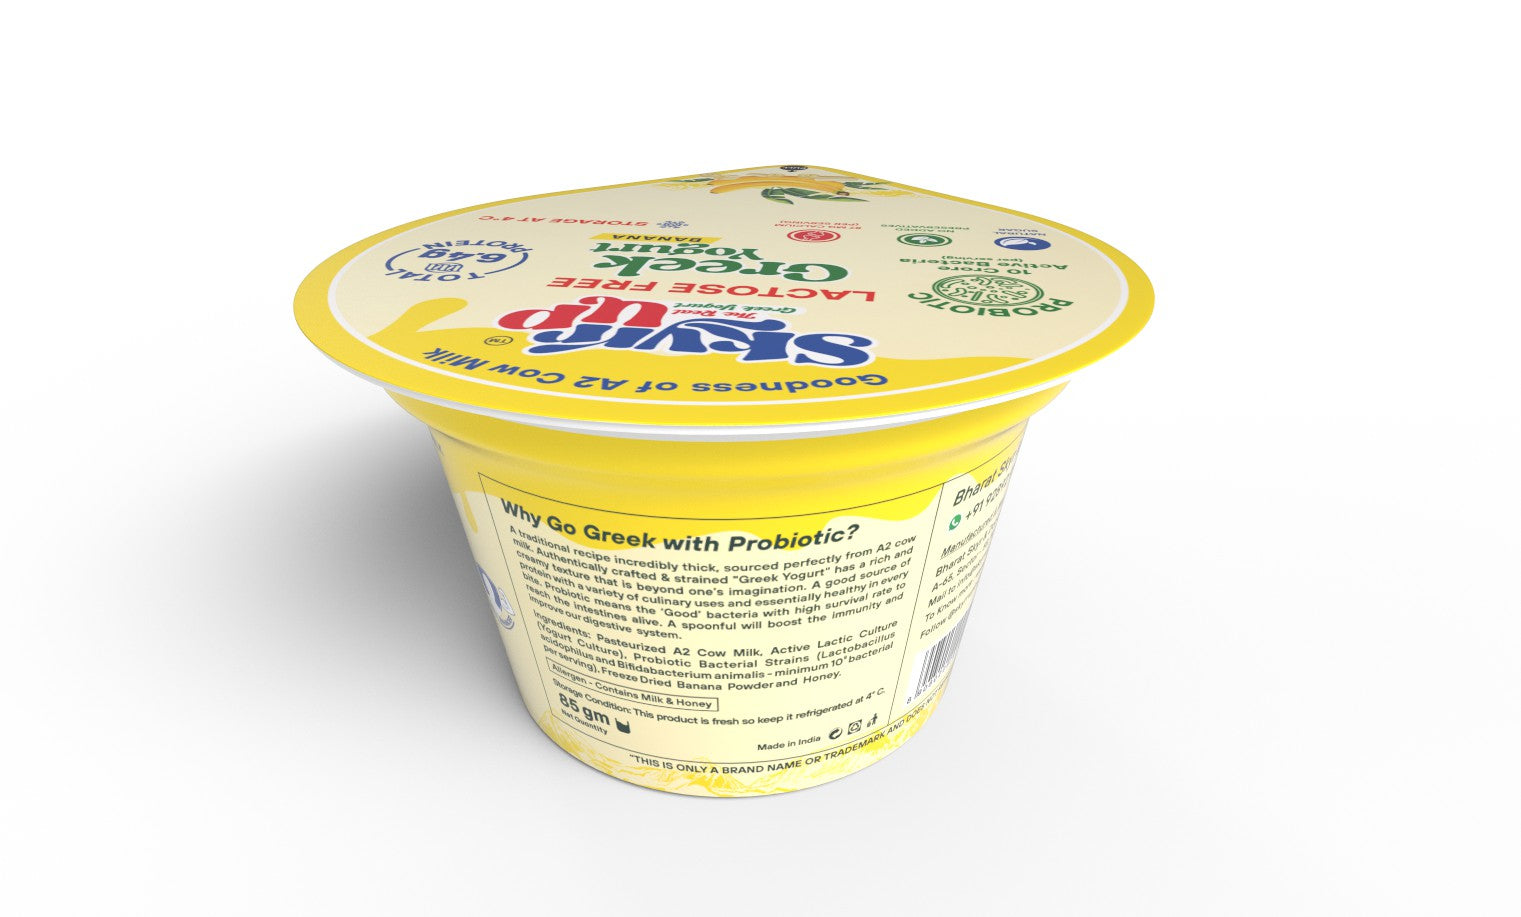 Greek Yogurt - 85gm - Banana (Made From A2 Cow Milk) - Probiotic, 6.4gm Protein, Zero Preservatives, Lactose Free